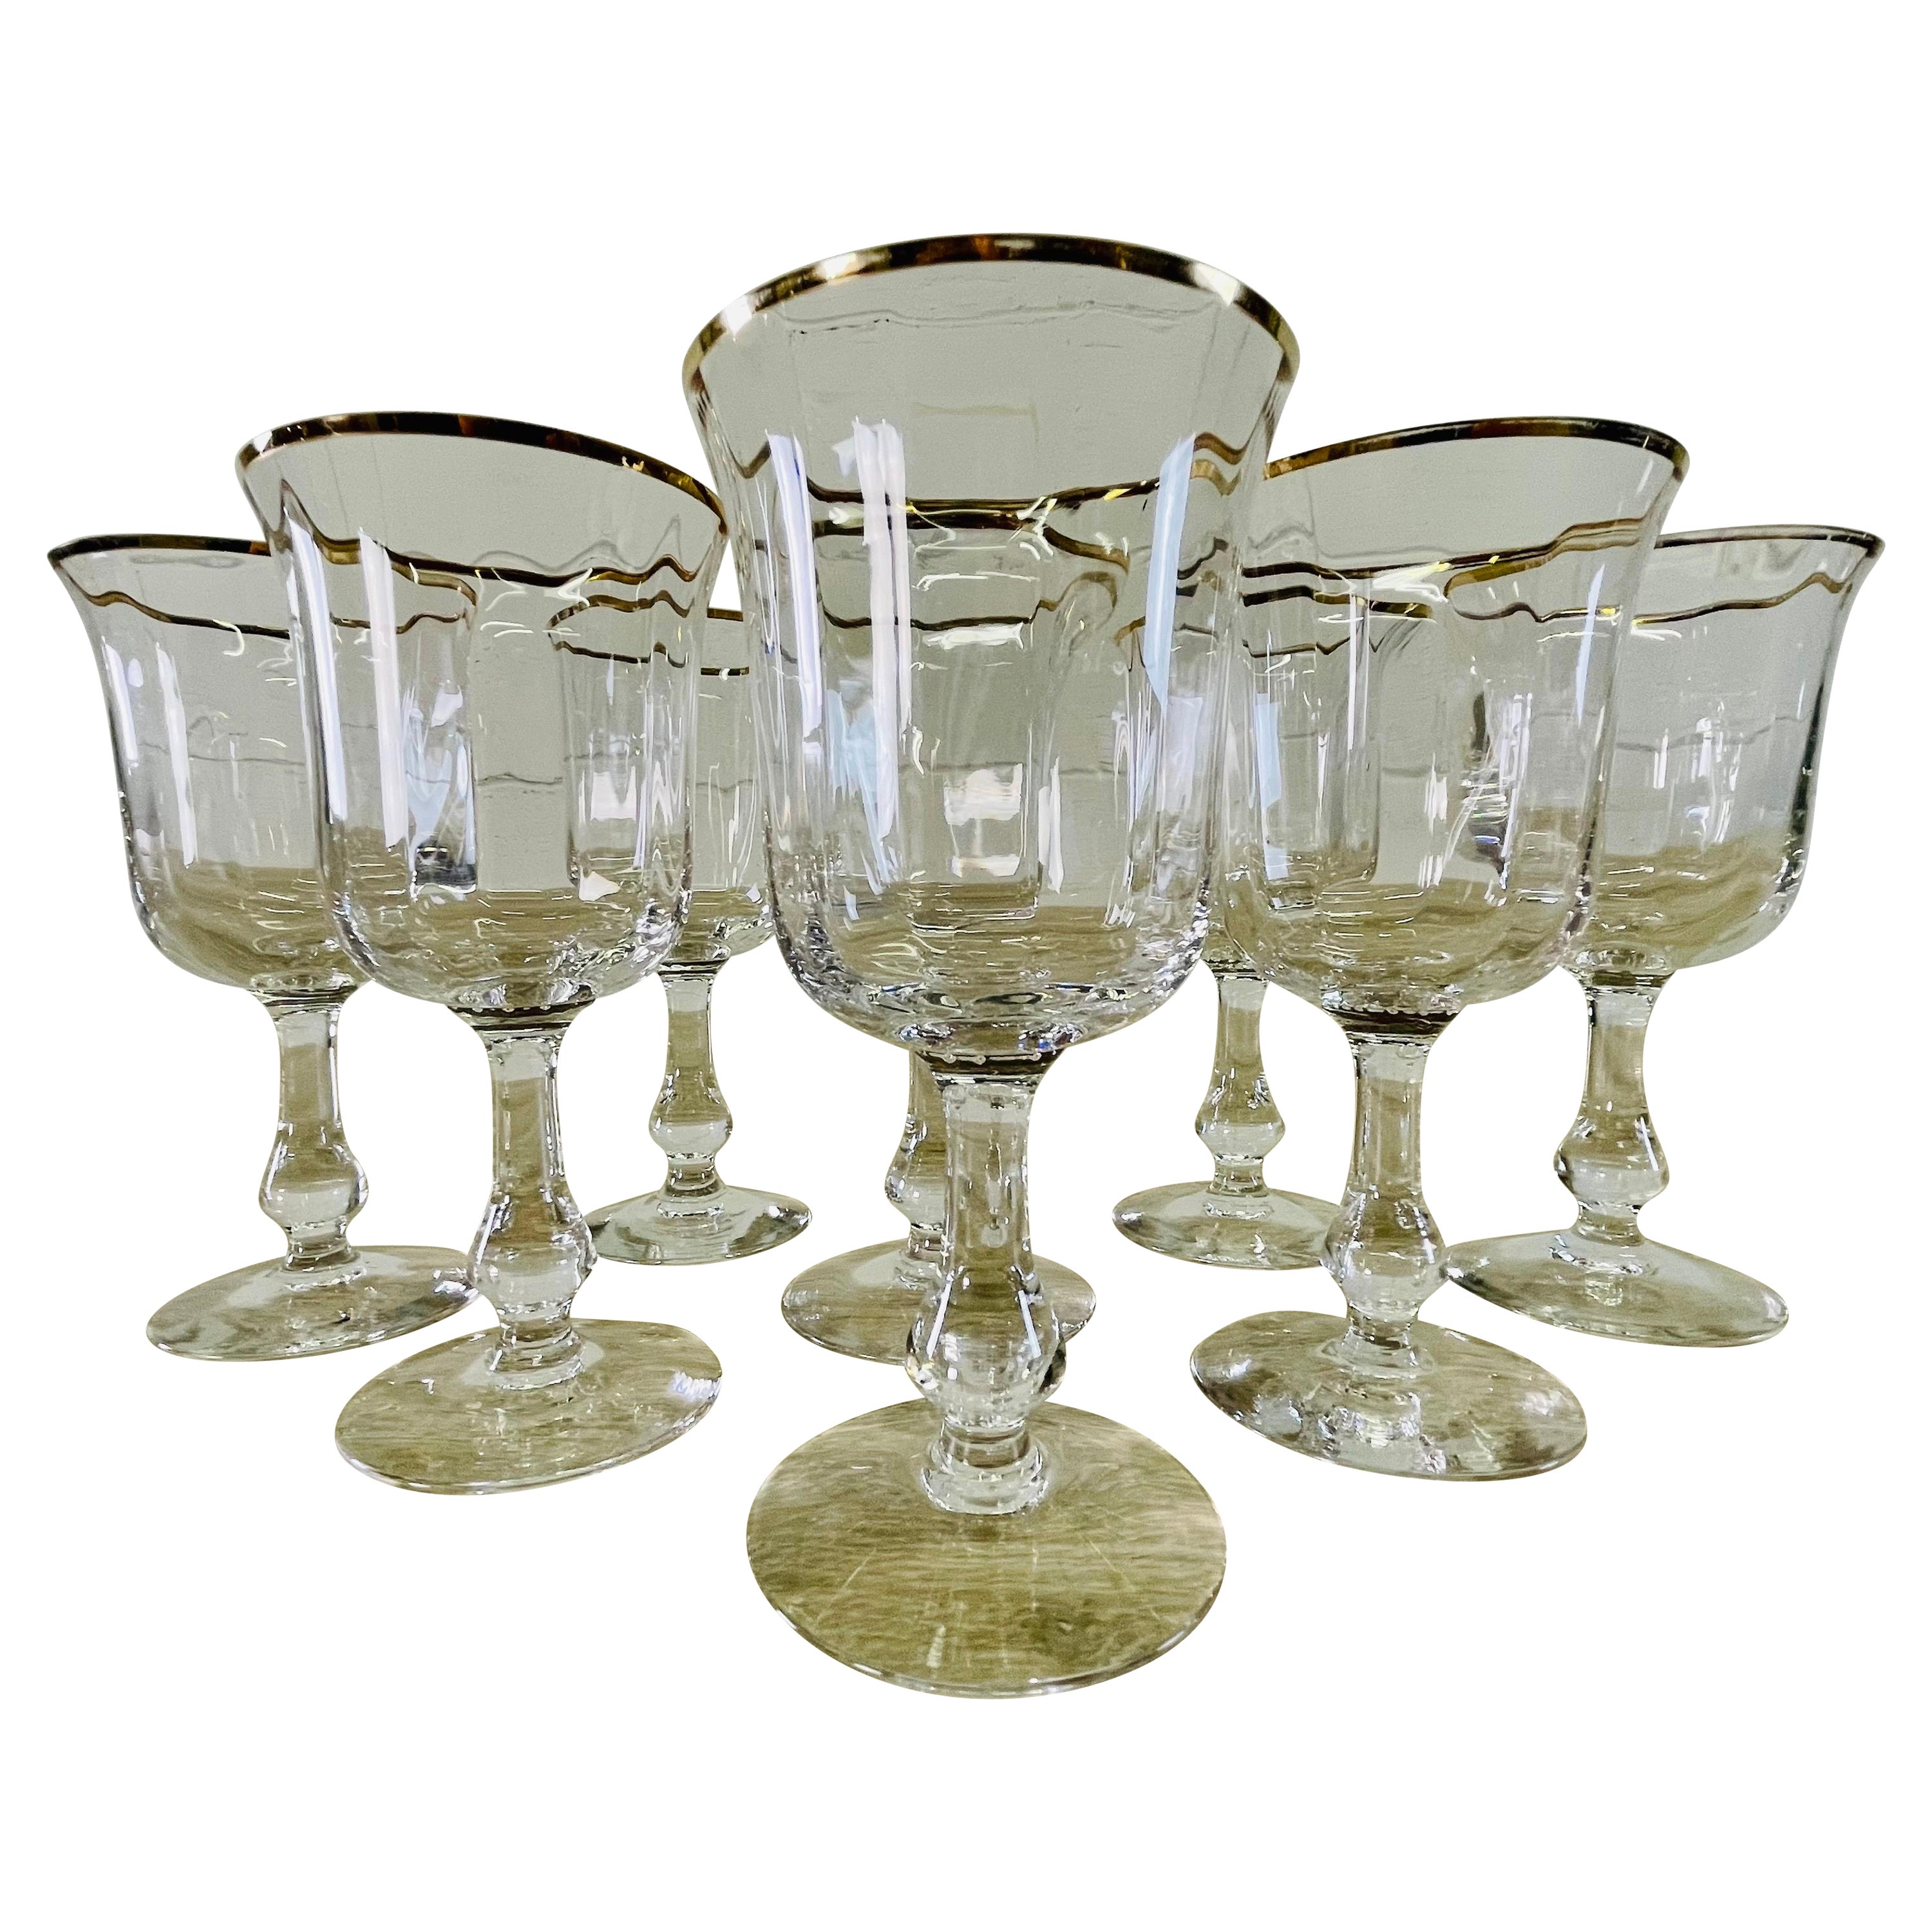 1970s Gold Rim Glass Water Stems, Set of 8